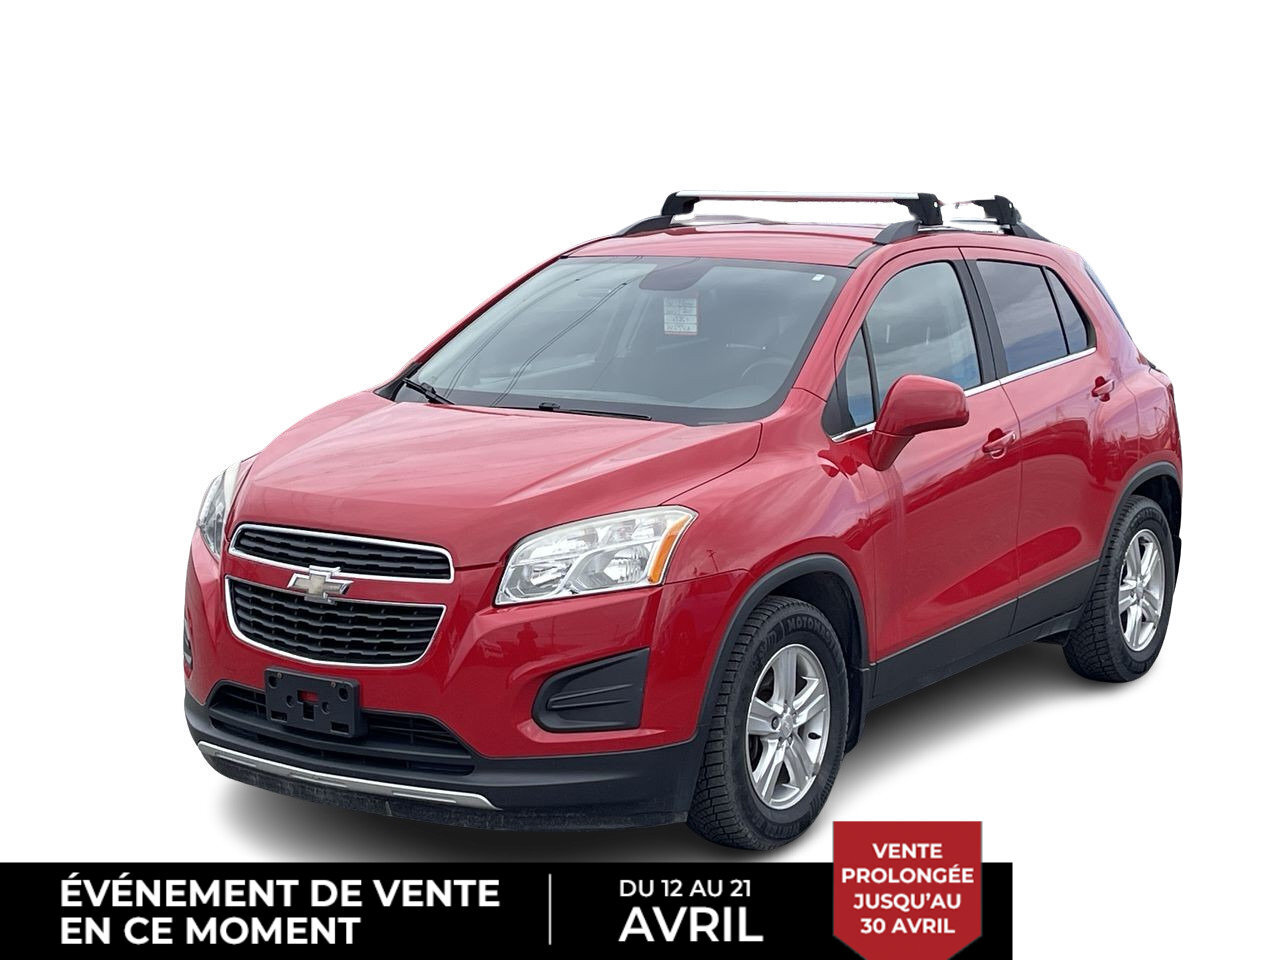 2014 Chevrolet Trax LT + CRUISE + GROUPE ELECTRIQUE + BLUETOOTH ++++++